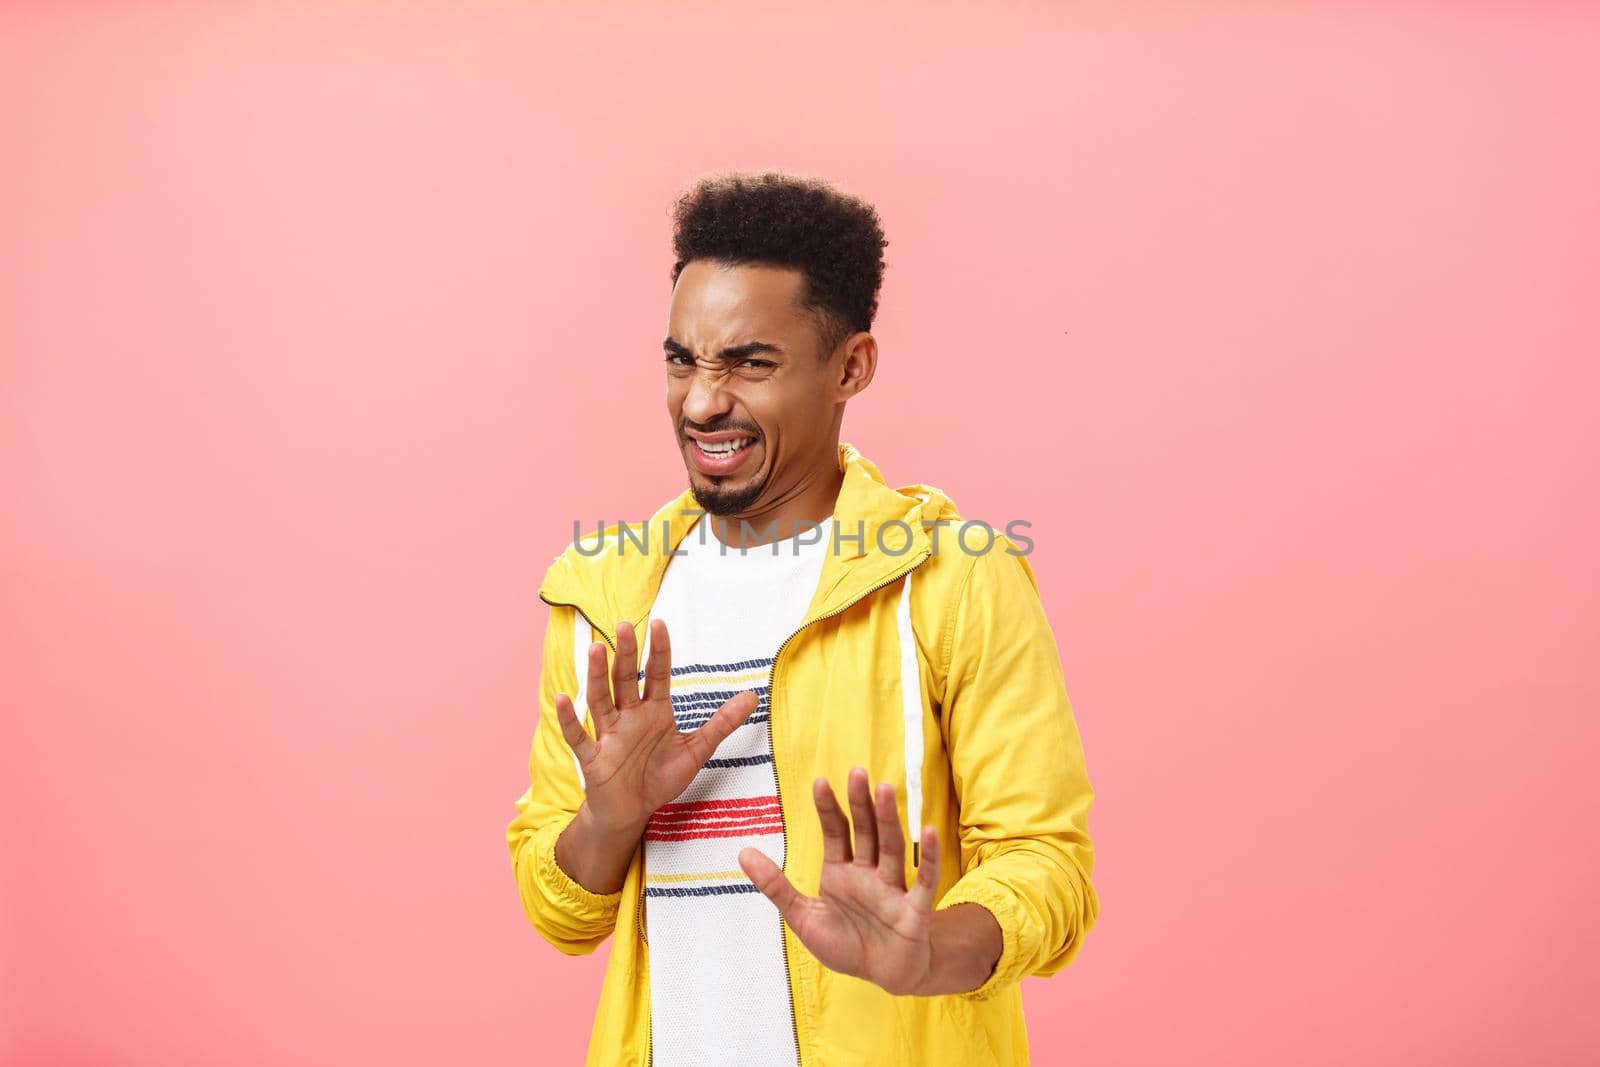 Guy prefers staying out of troubles. Disgusted displeased handsome dark-skinned man with afro hairstyle wrinkling nose and clenching teeth in disgust raising hands in rejection or refusal from dislike. Copy space